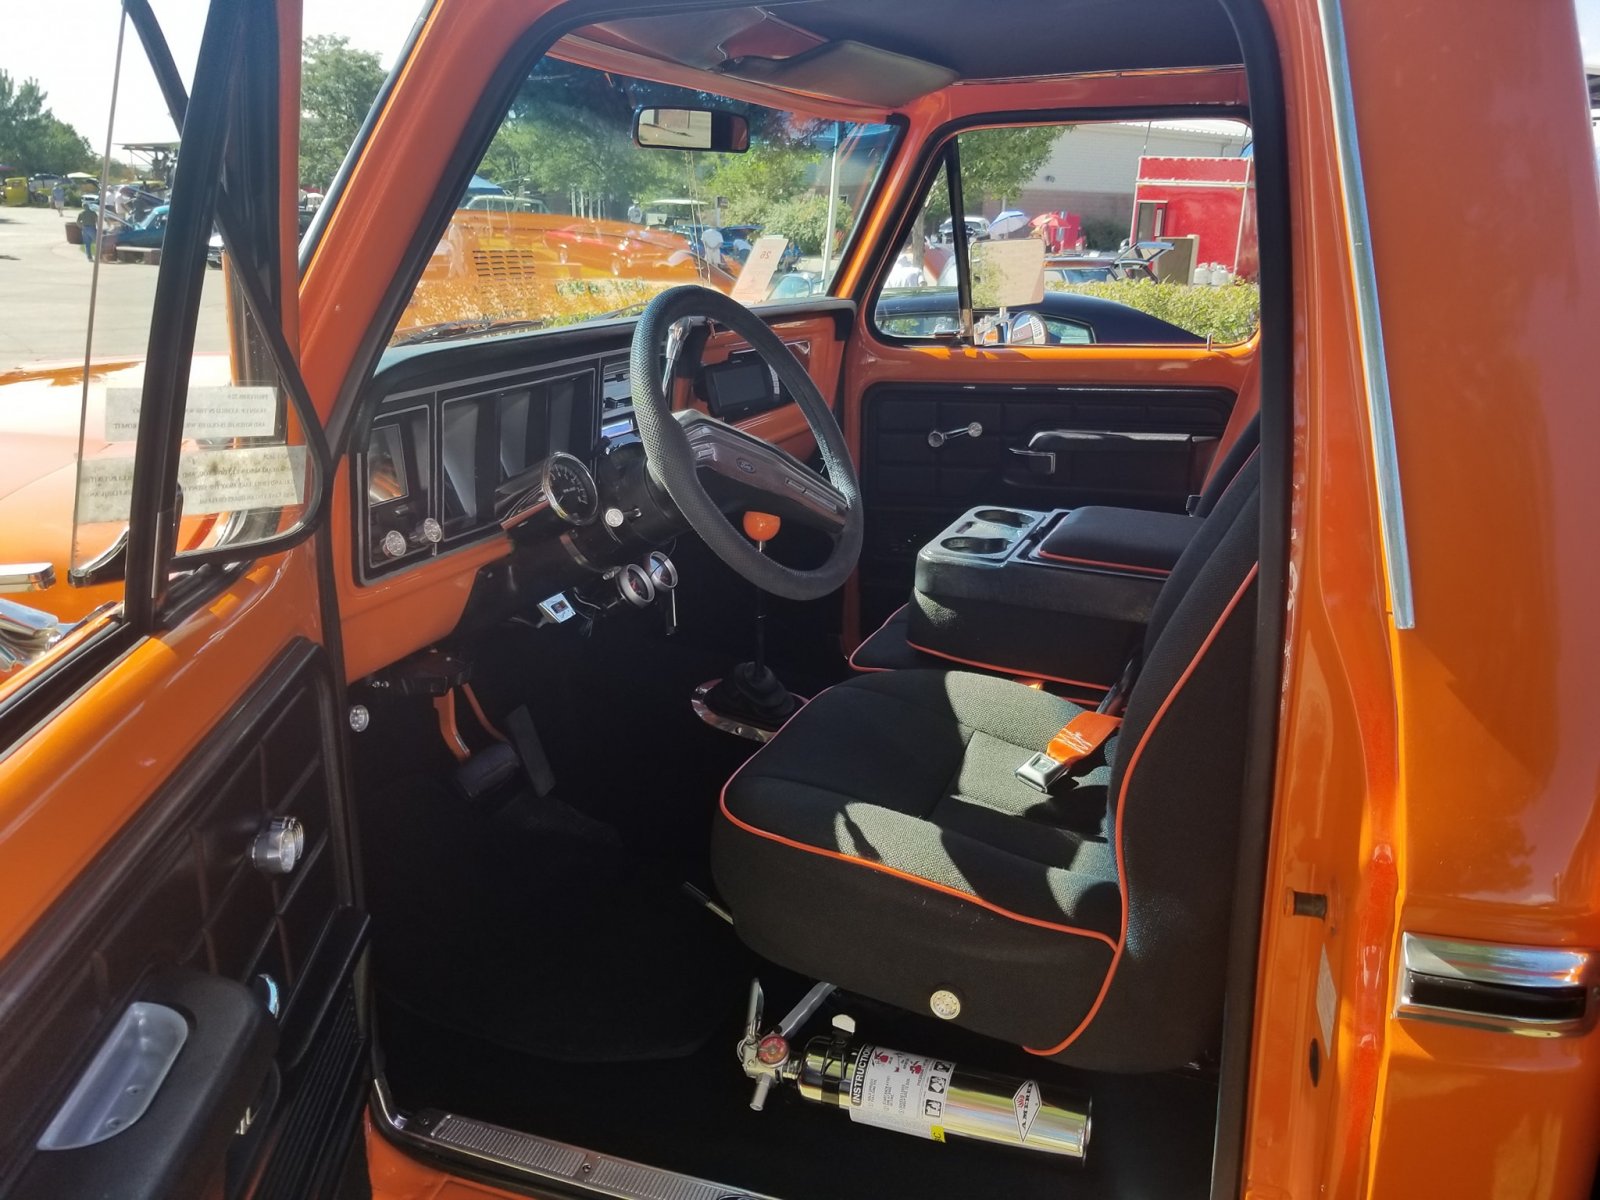 1979 Ford F250 Truck Has A 460ci With A C6 Transmission 5.jpg